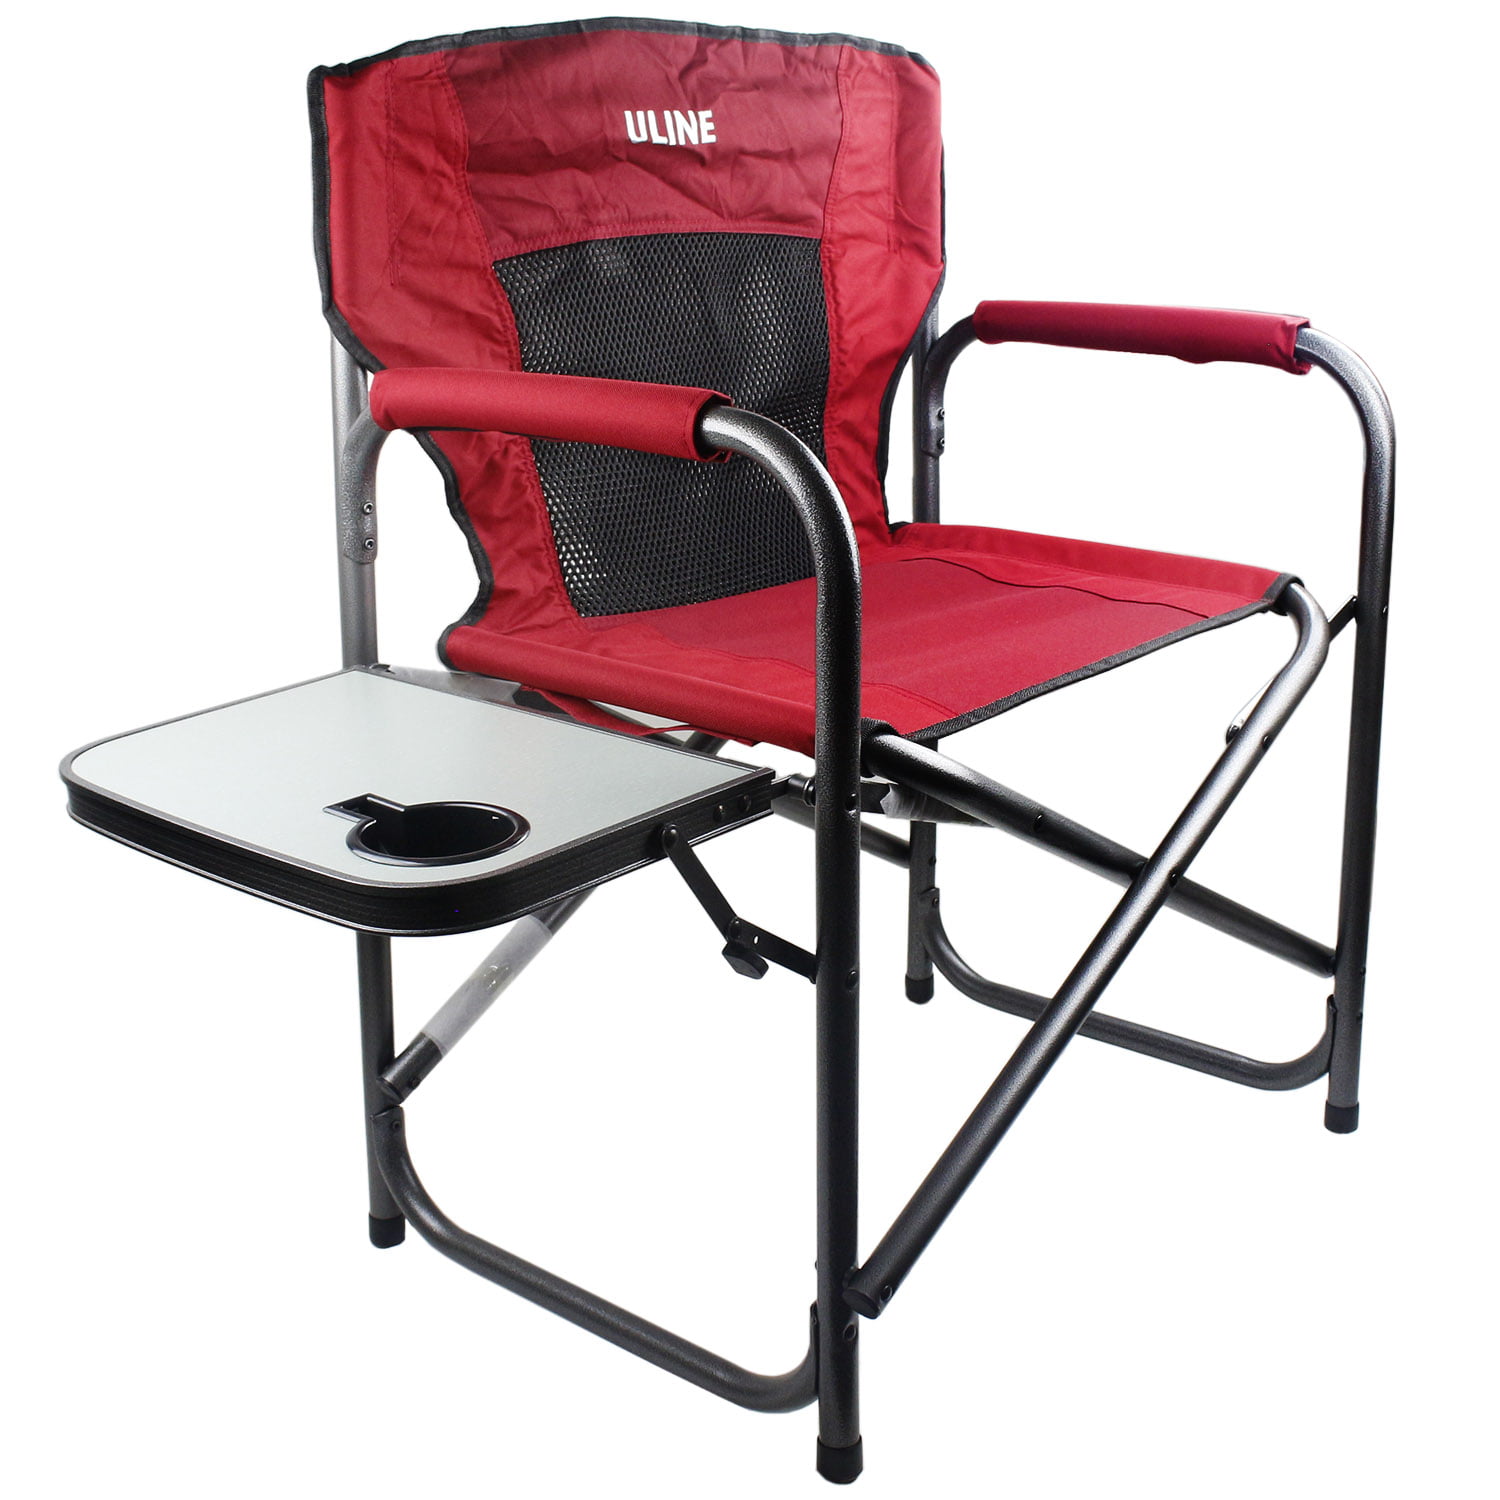 uline camping chair